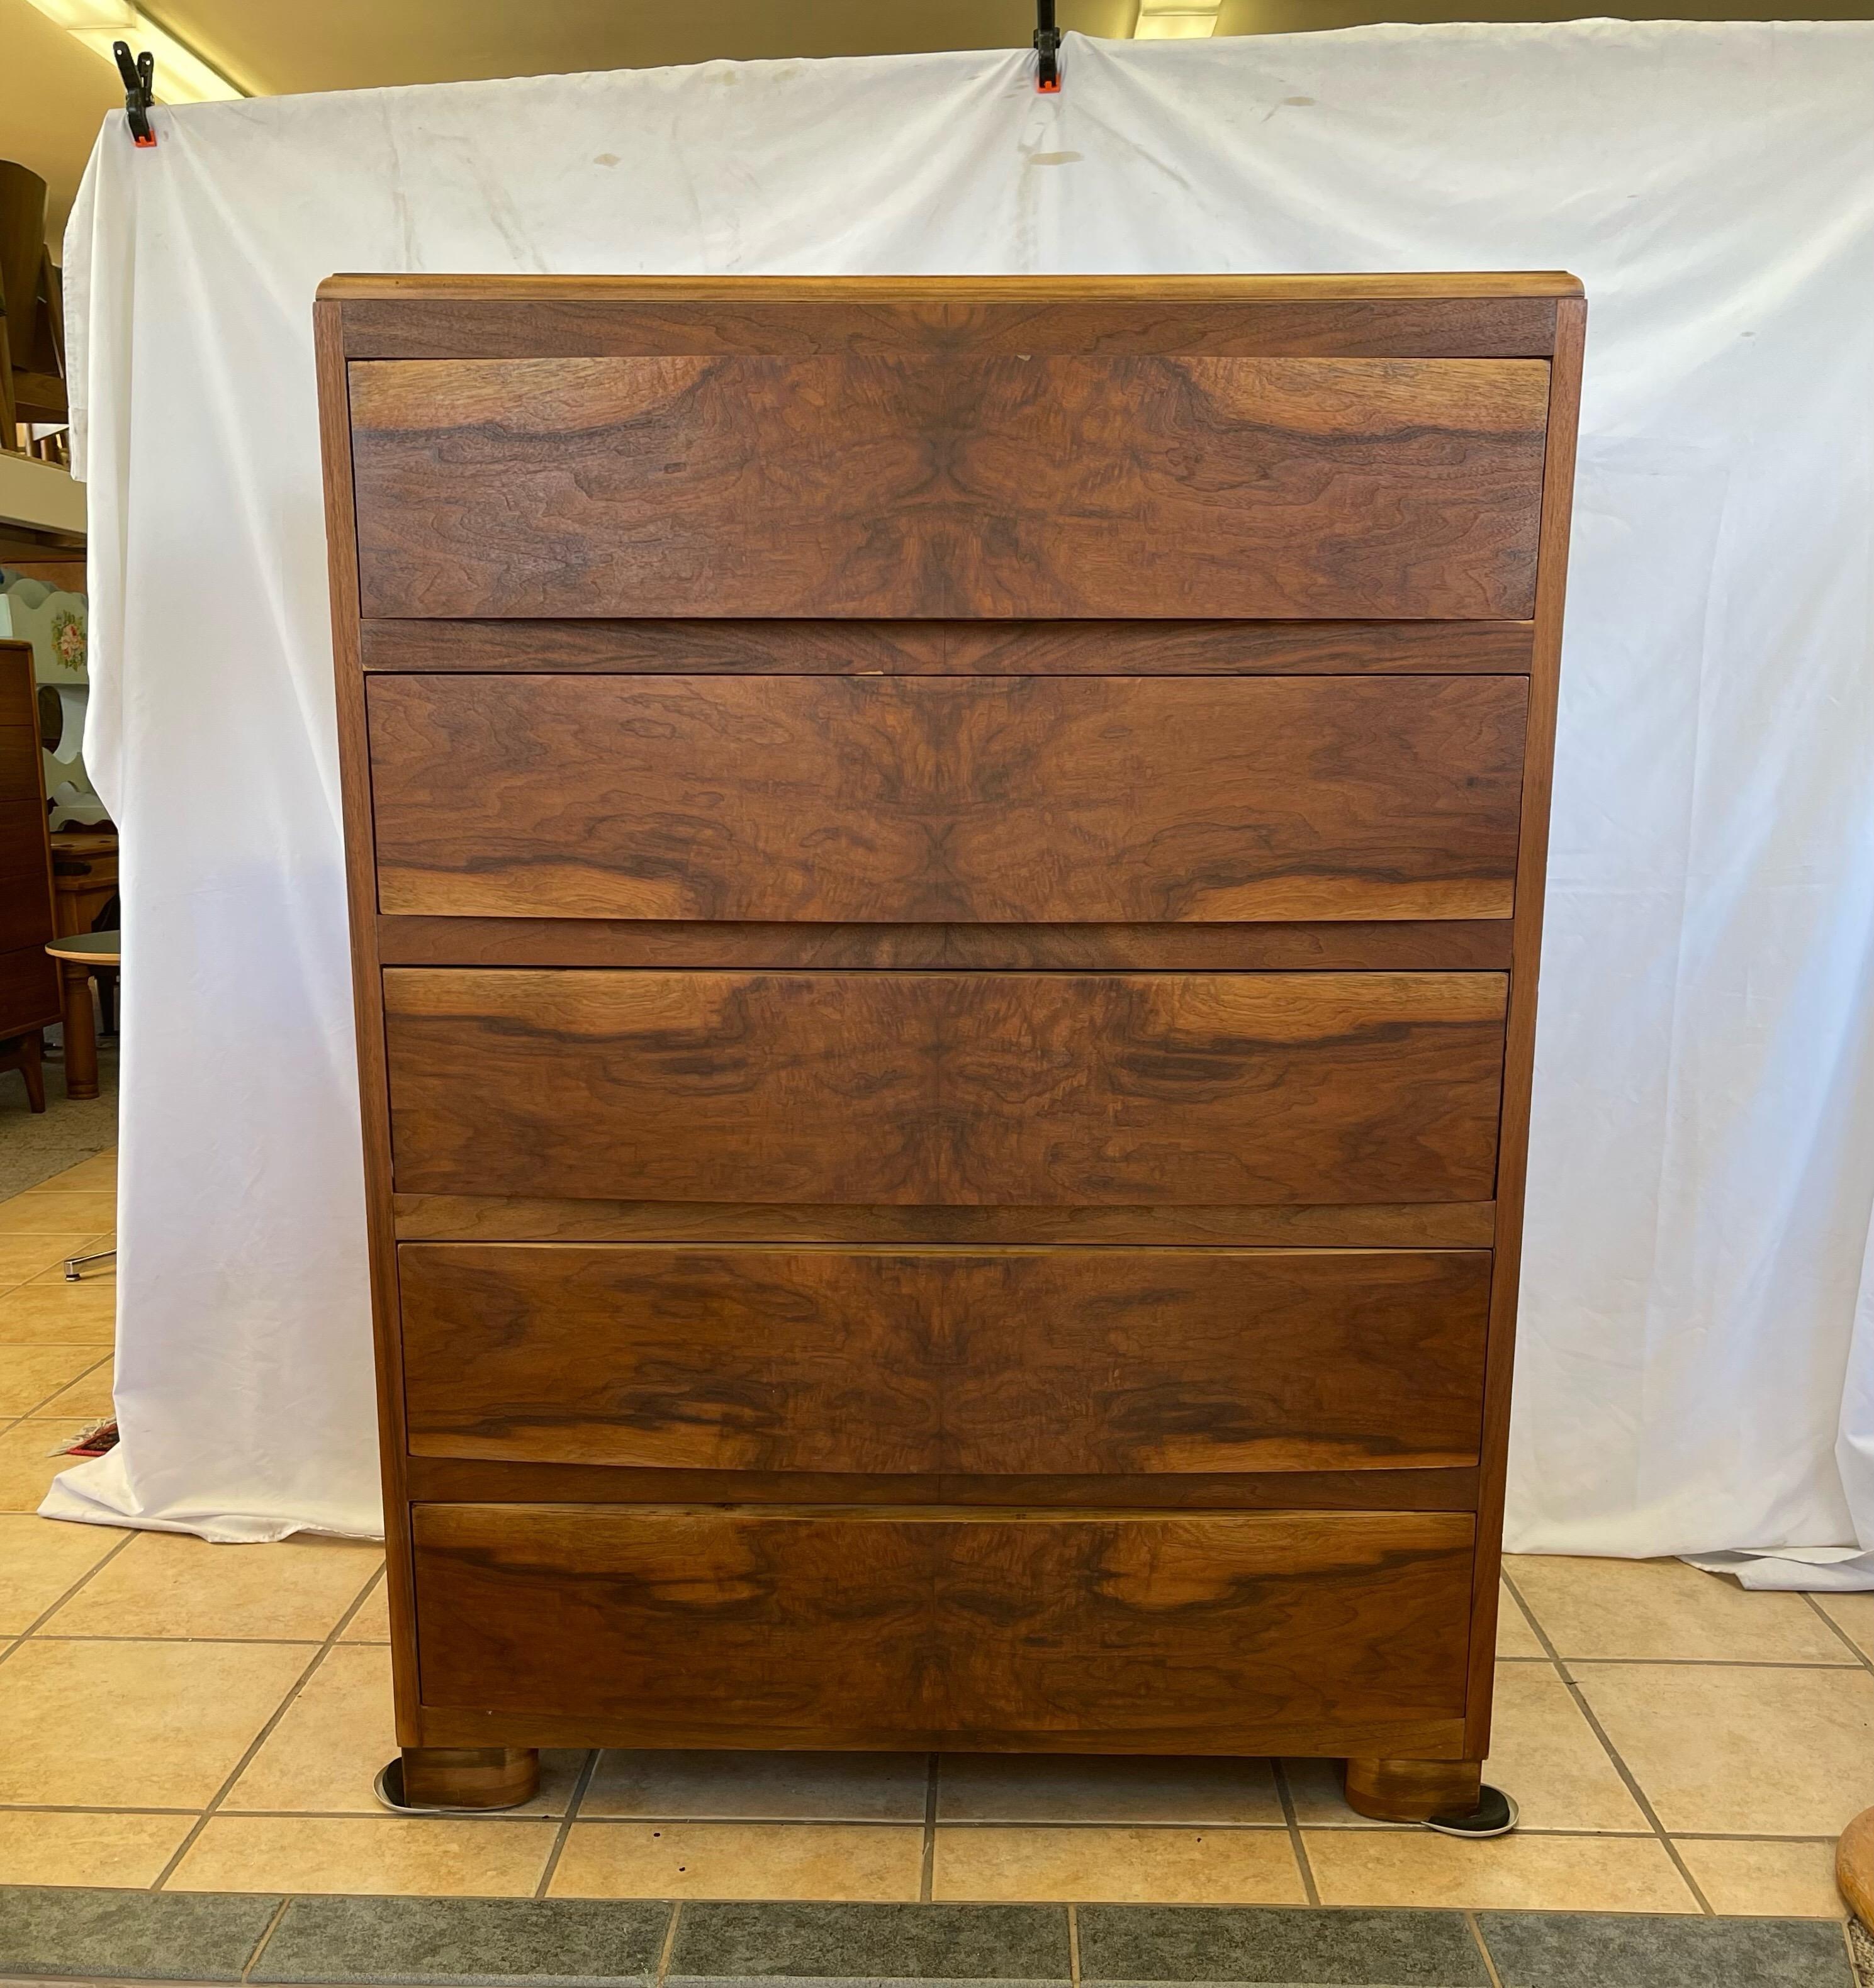 Rare and beautiful Art Deco walnut Burl dresser with soft bow front. There are five drawers with hidden side pulls. Solid wood drawer liners and dovetail construction.

Dimensions: 36W 21D 49H.